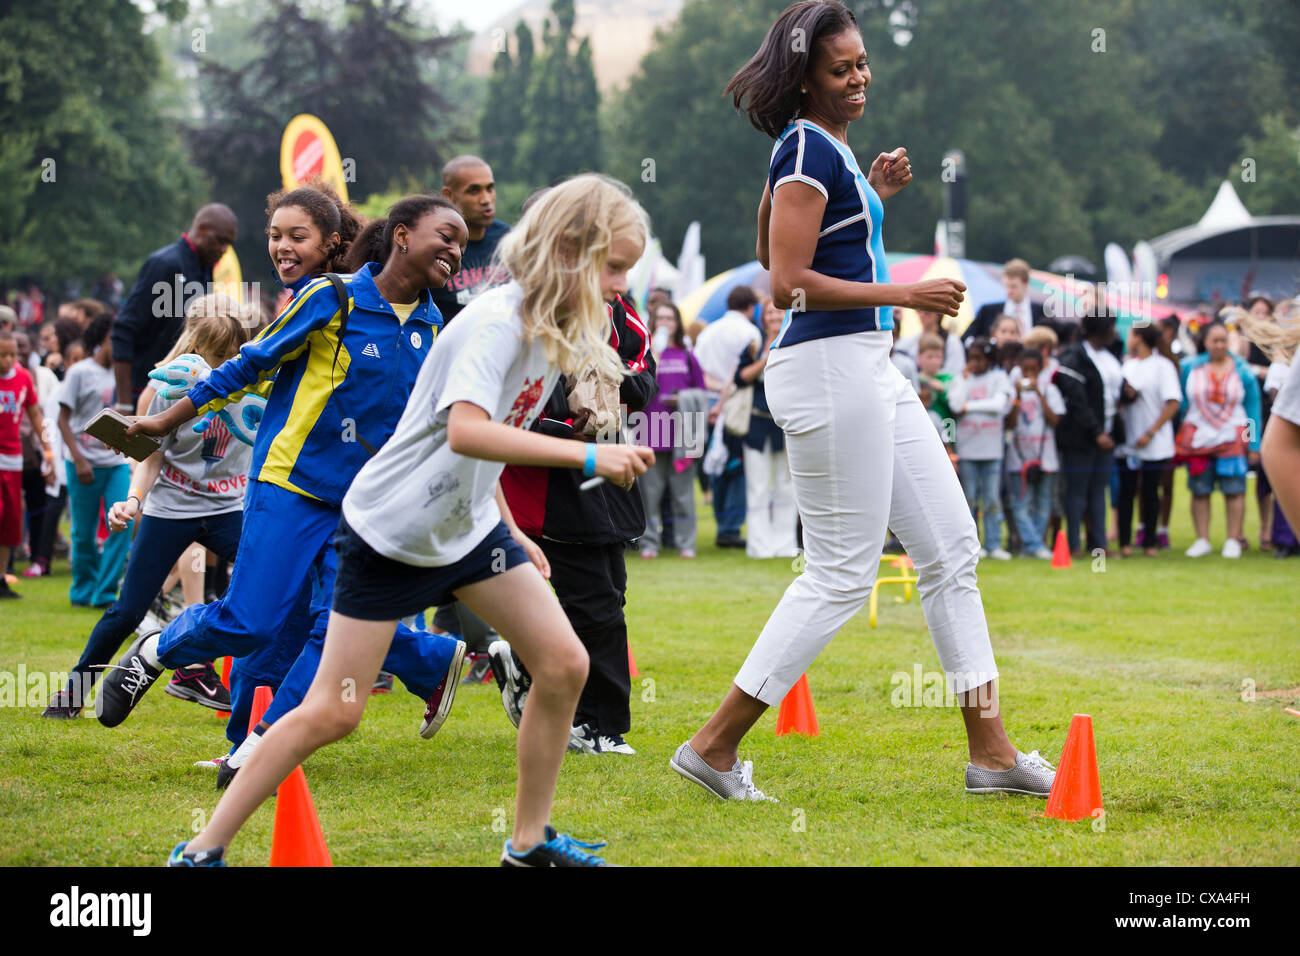 Michelle Obama runs at an activity station during a “Let’s Move! London” event at Winfield House in London, England Stock Photo